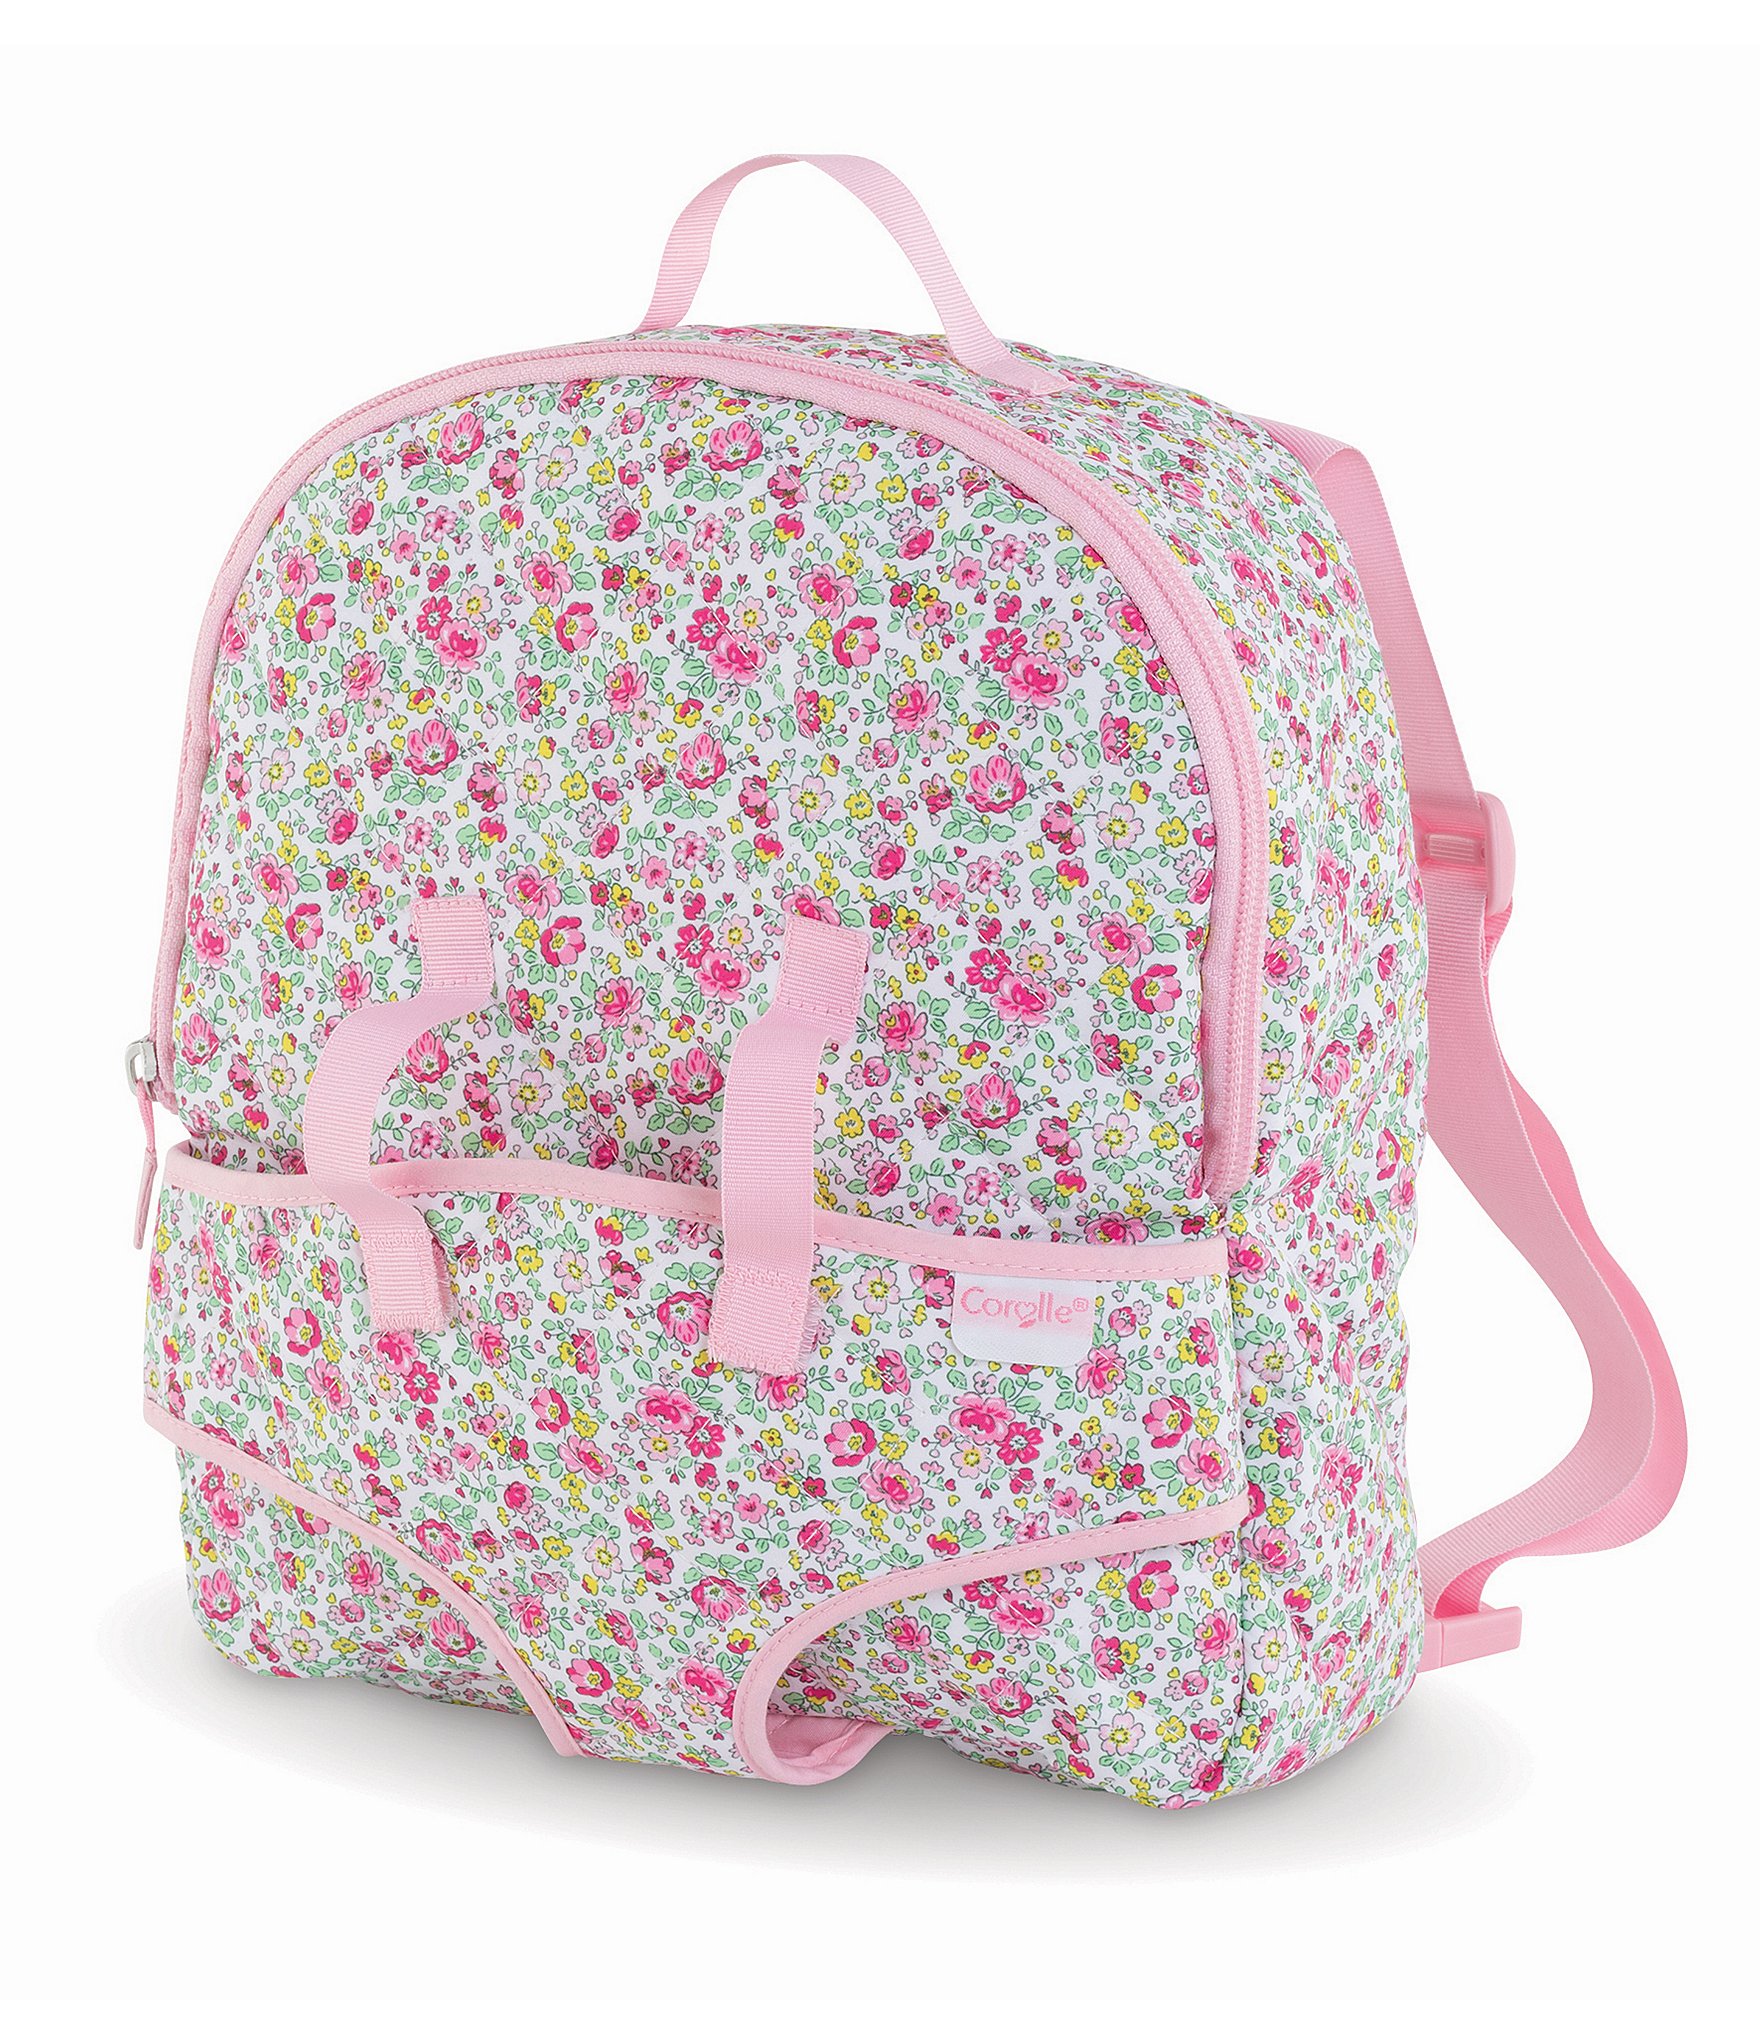 Baby Doll Carriers and Toy Carrier Backpacks